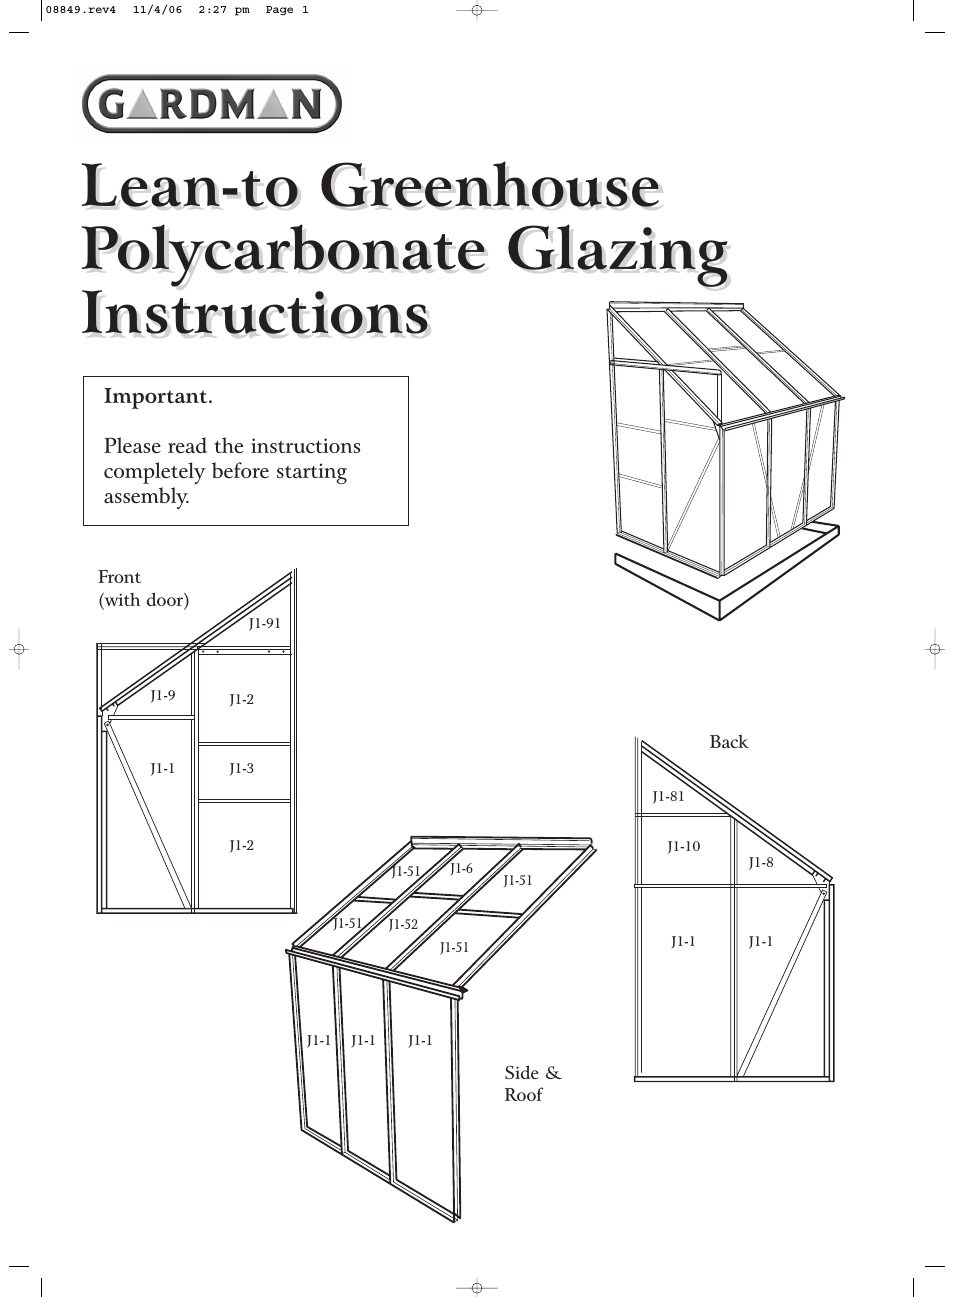 Lean-to Greenhouse Polycarbonate Glazing